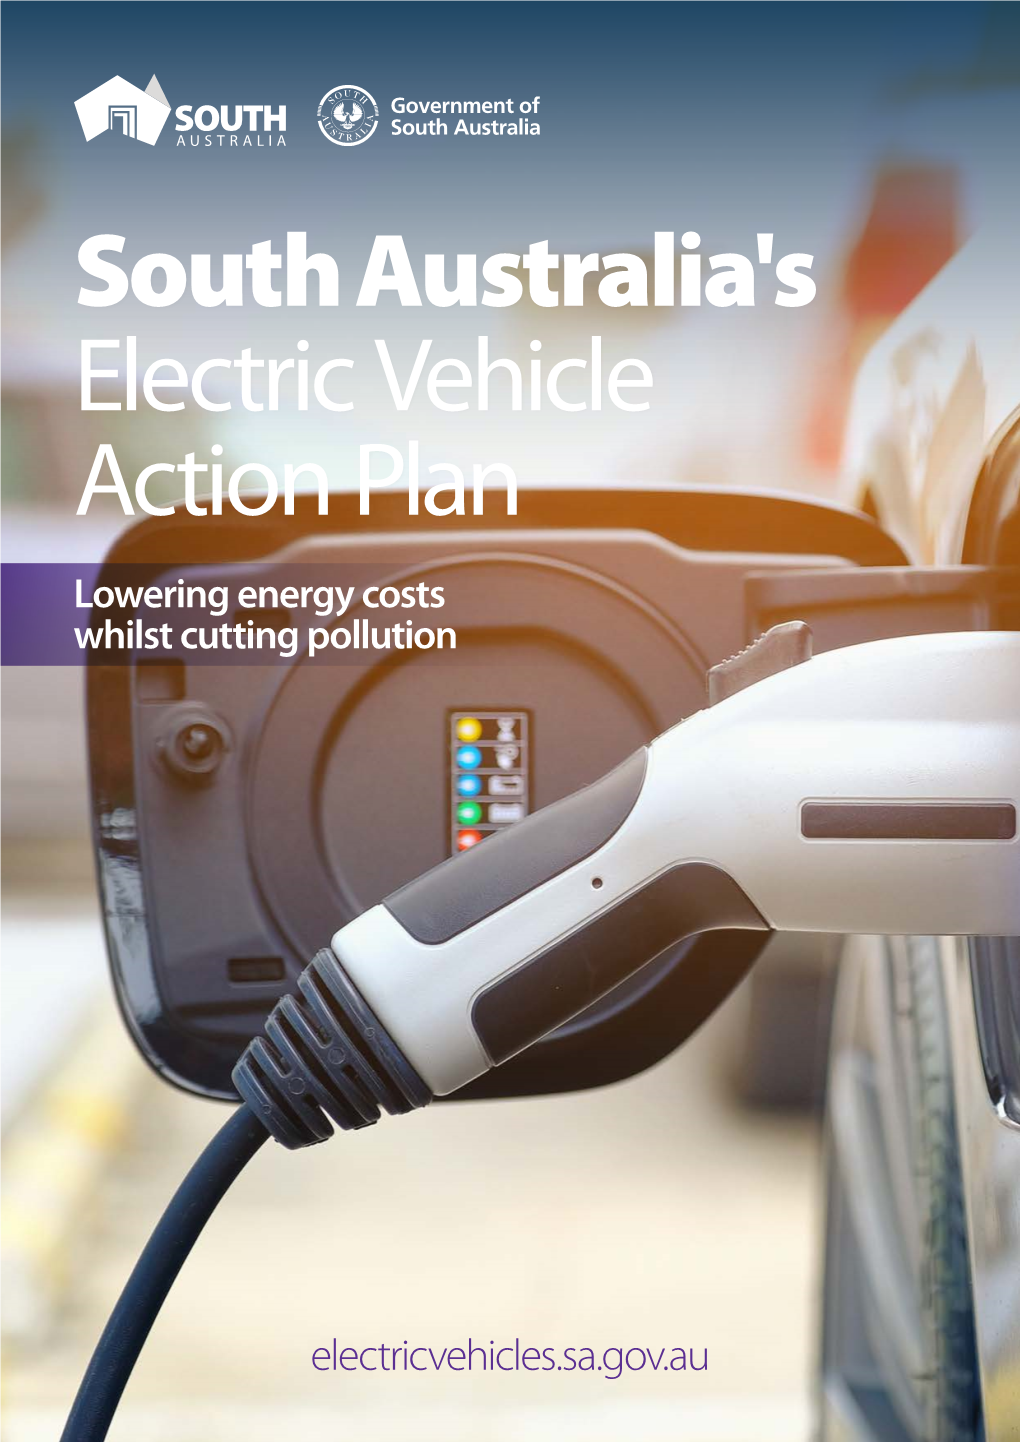 South Australia's Electric Vehicle Action Plan Lowering Energy Costs